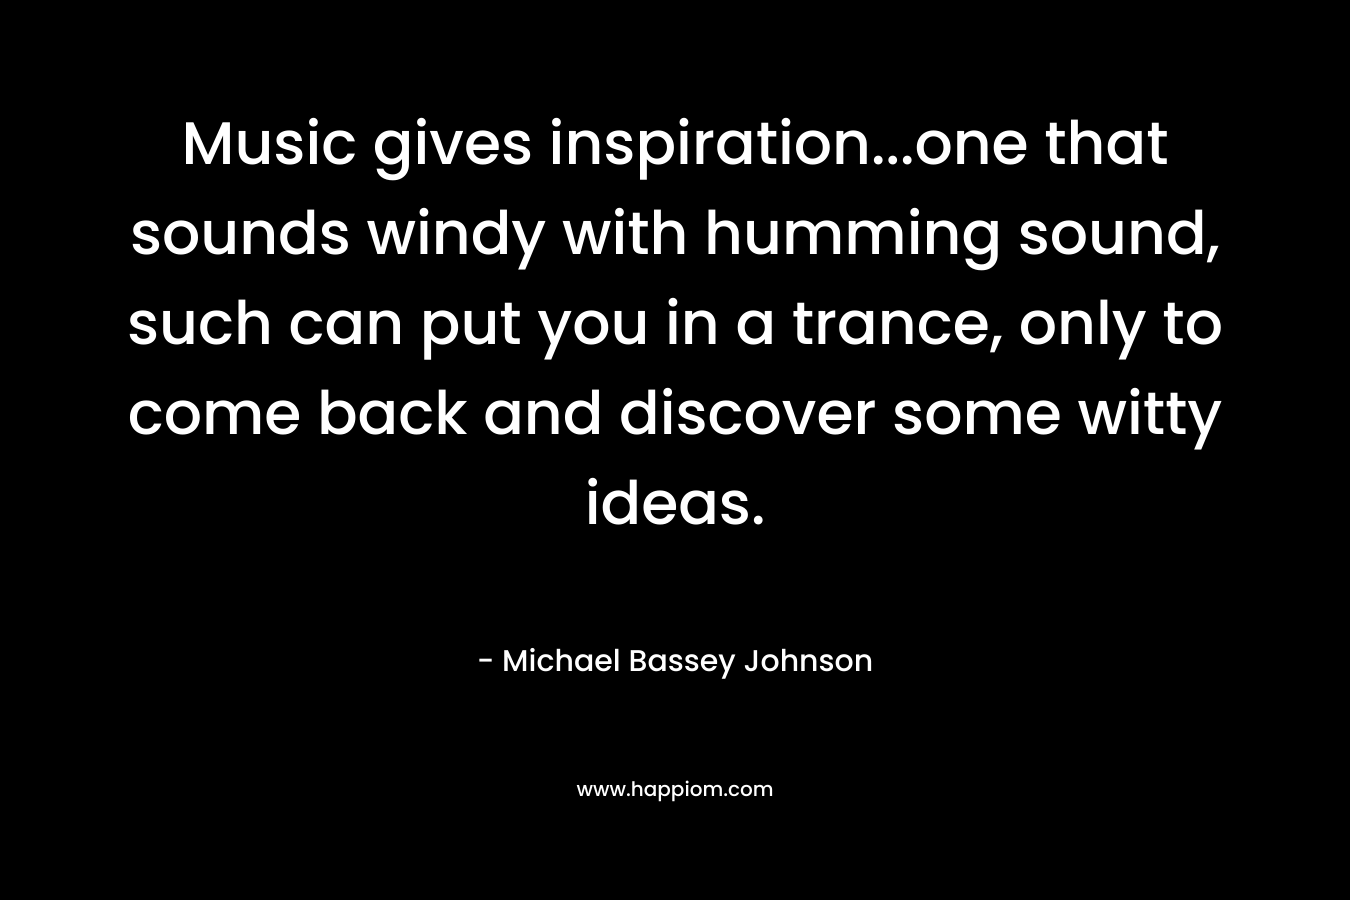 Music gives inspiration…one that sounds windy with humming sound, such can put you in a trance, only to come back and discover some witty ideas. – Michael Bassey Johnson